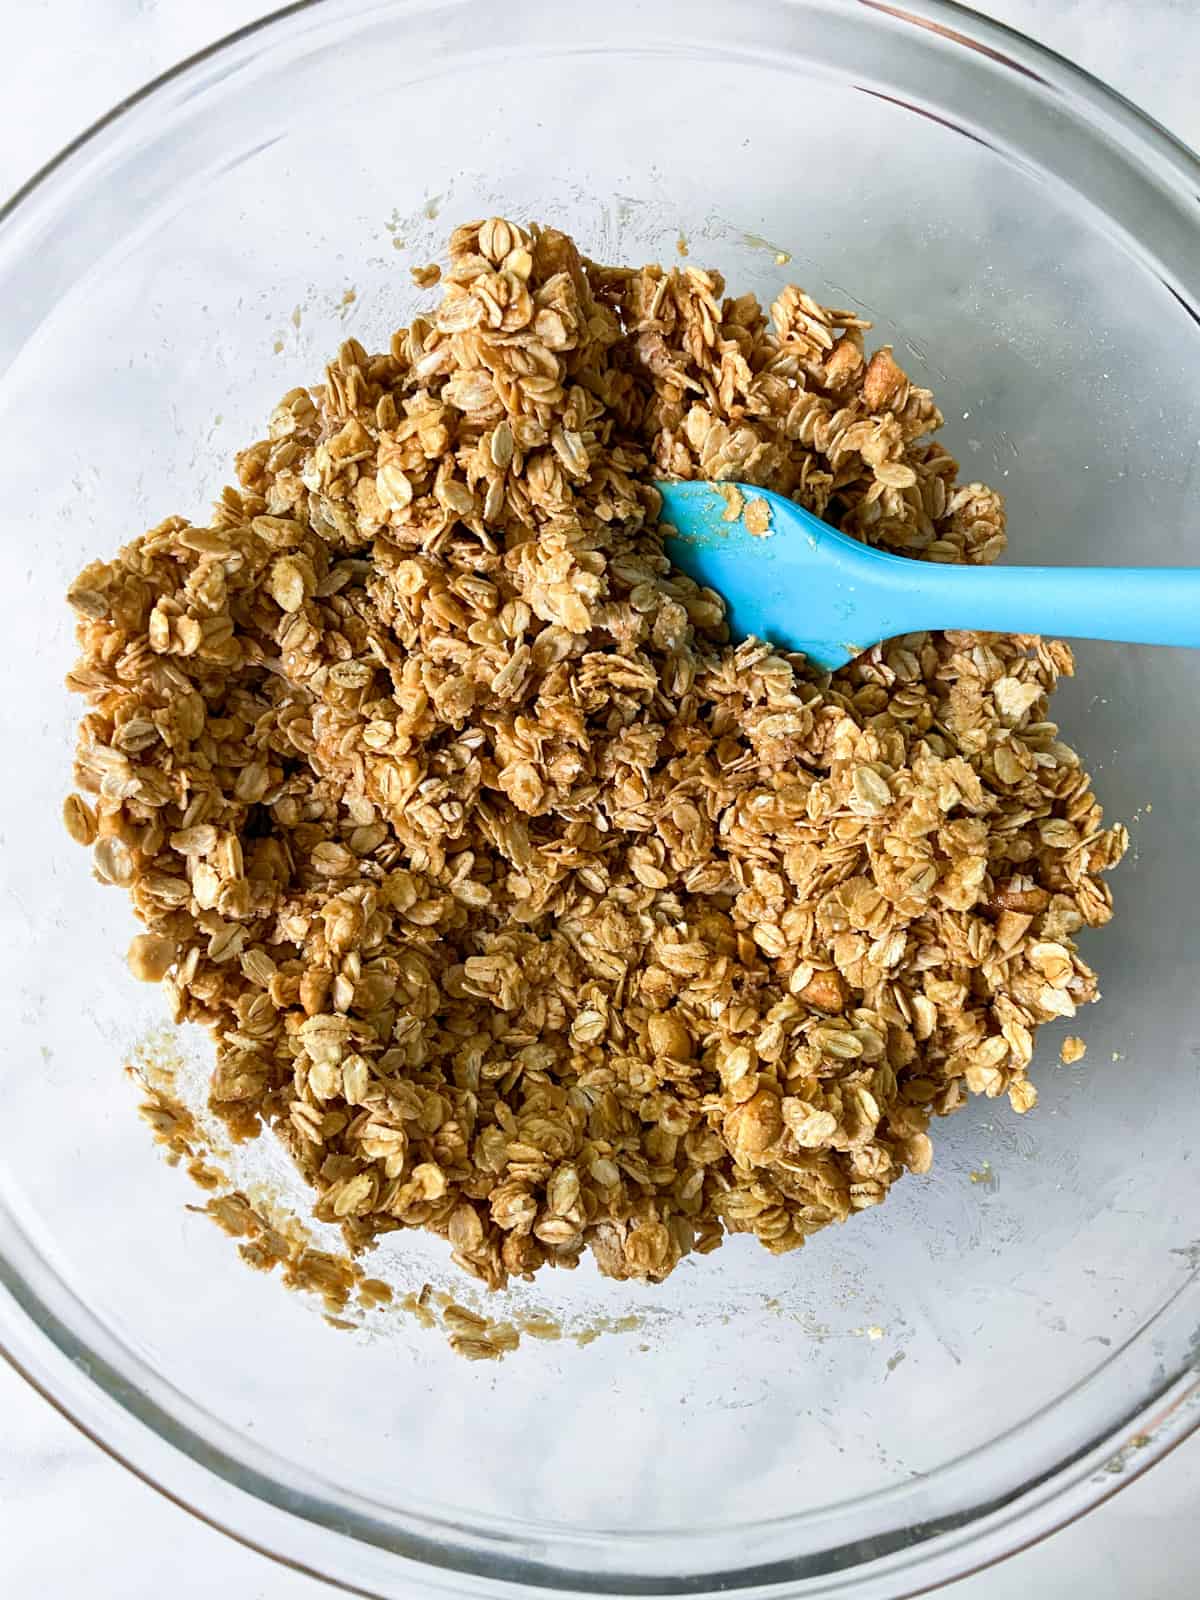 Unbaked granola in a bowl with a spatula.